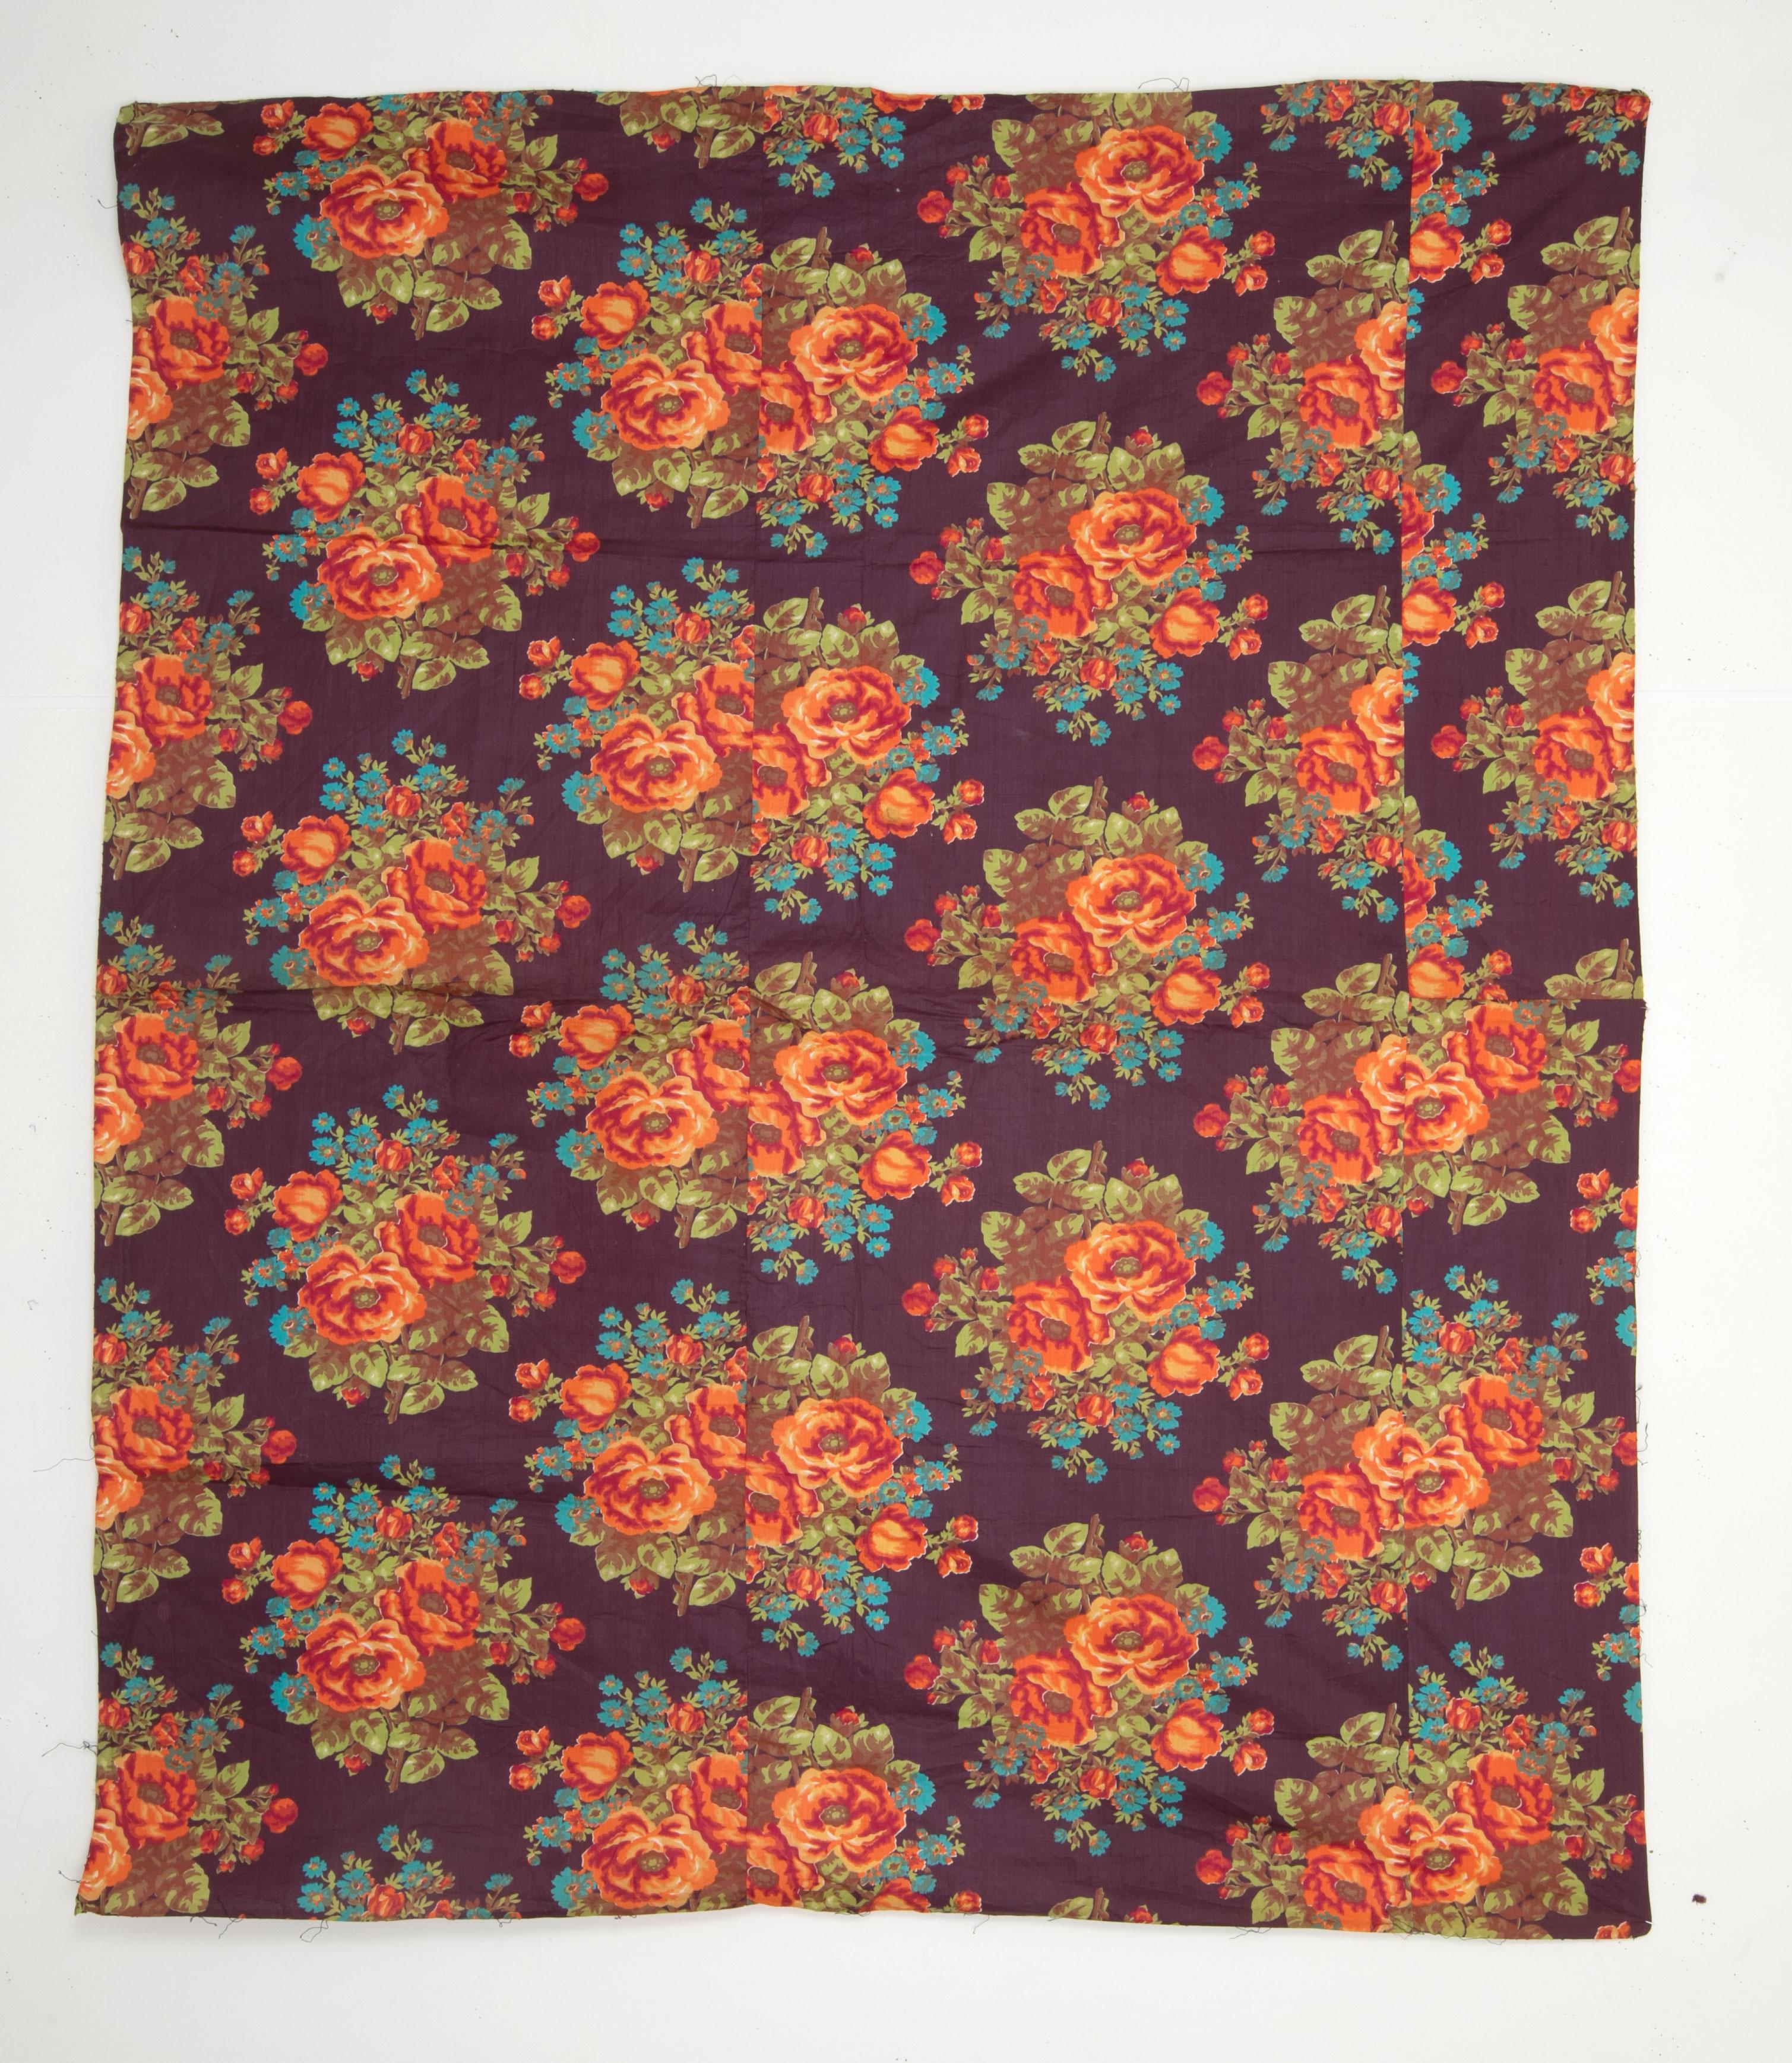 These type of Russian prints that are also called 'trade cloth' since they were made for Central Asian markets. They were used to make blankets and dresses, and also used for the lining of ikat chapans.